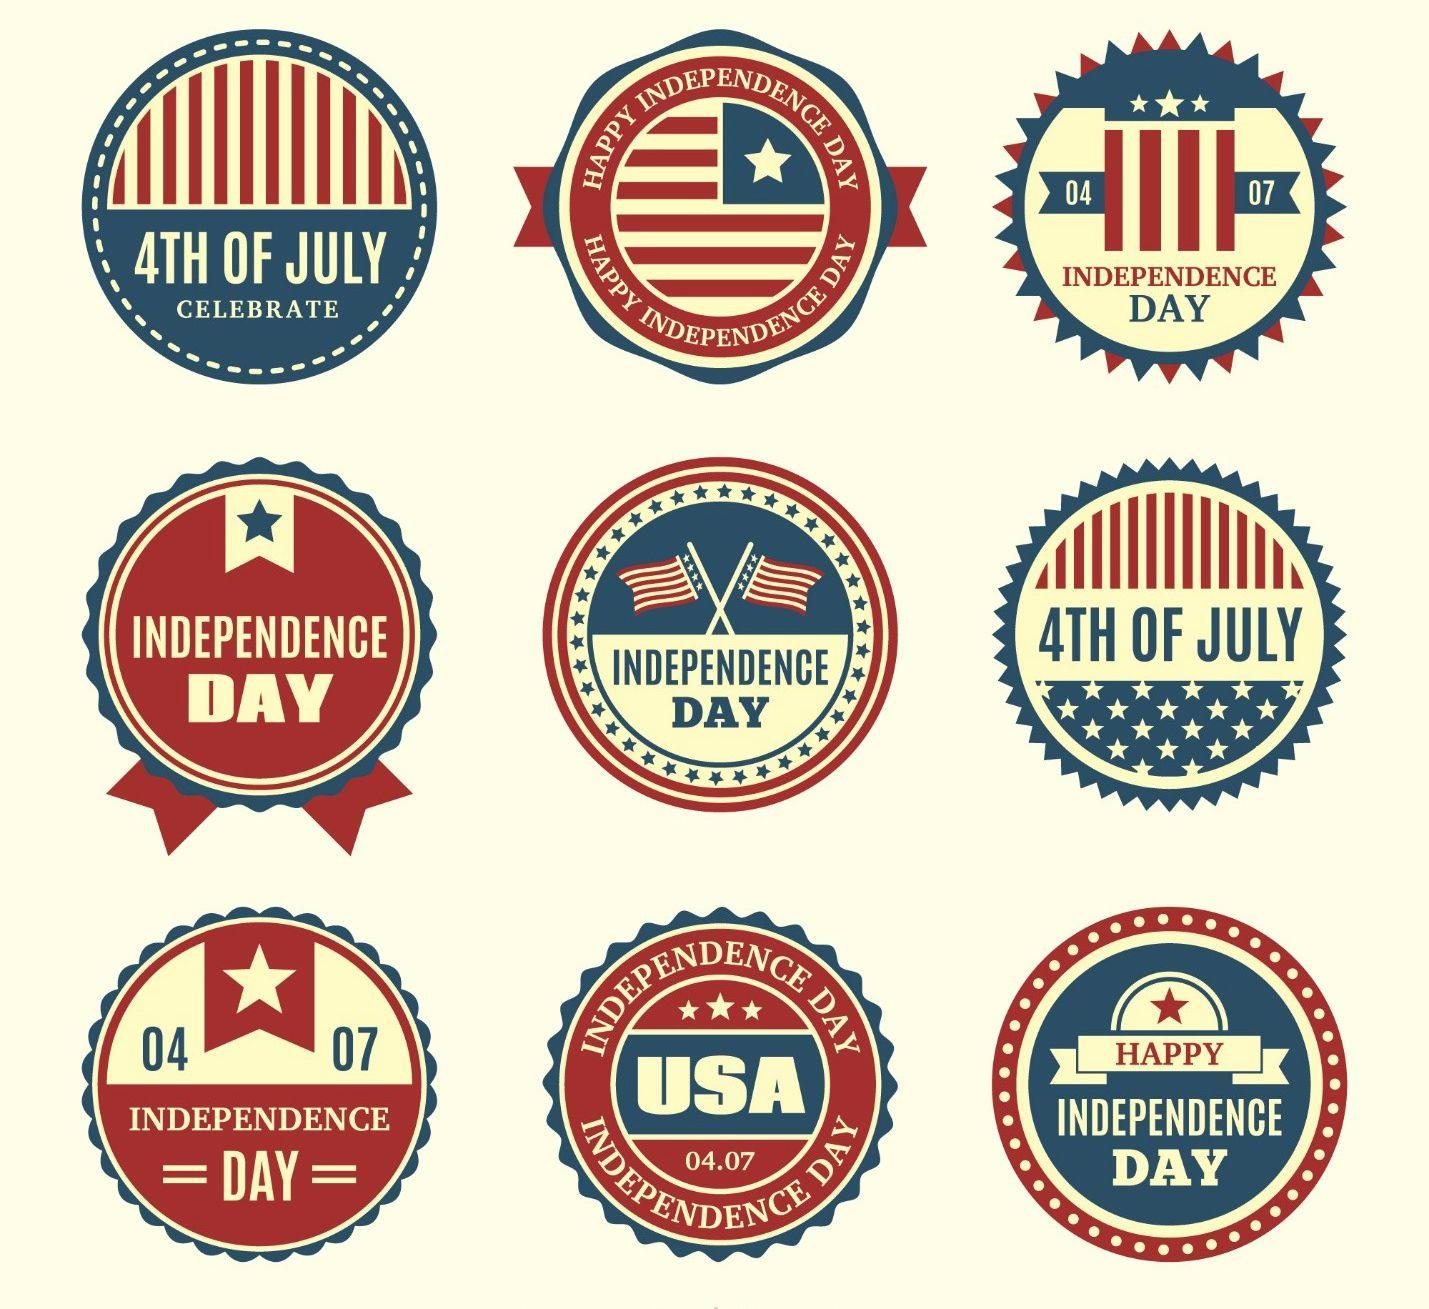 Independence Logo - Celebrate This Independence Day With USA Logo!